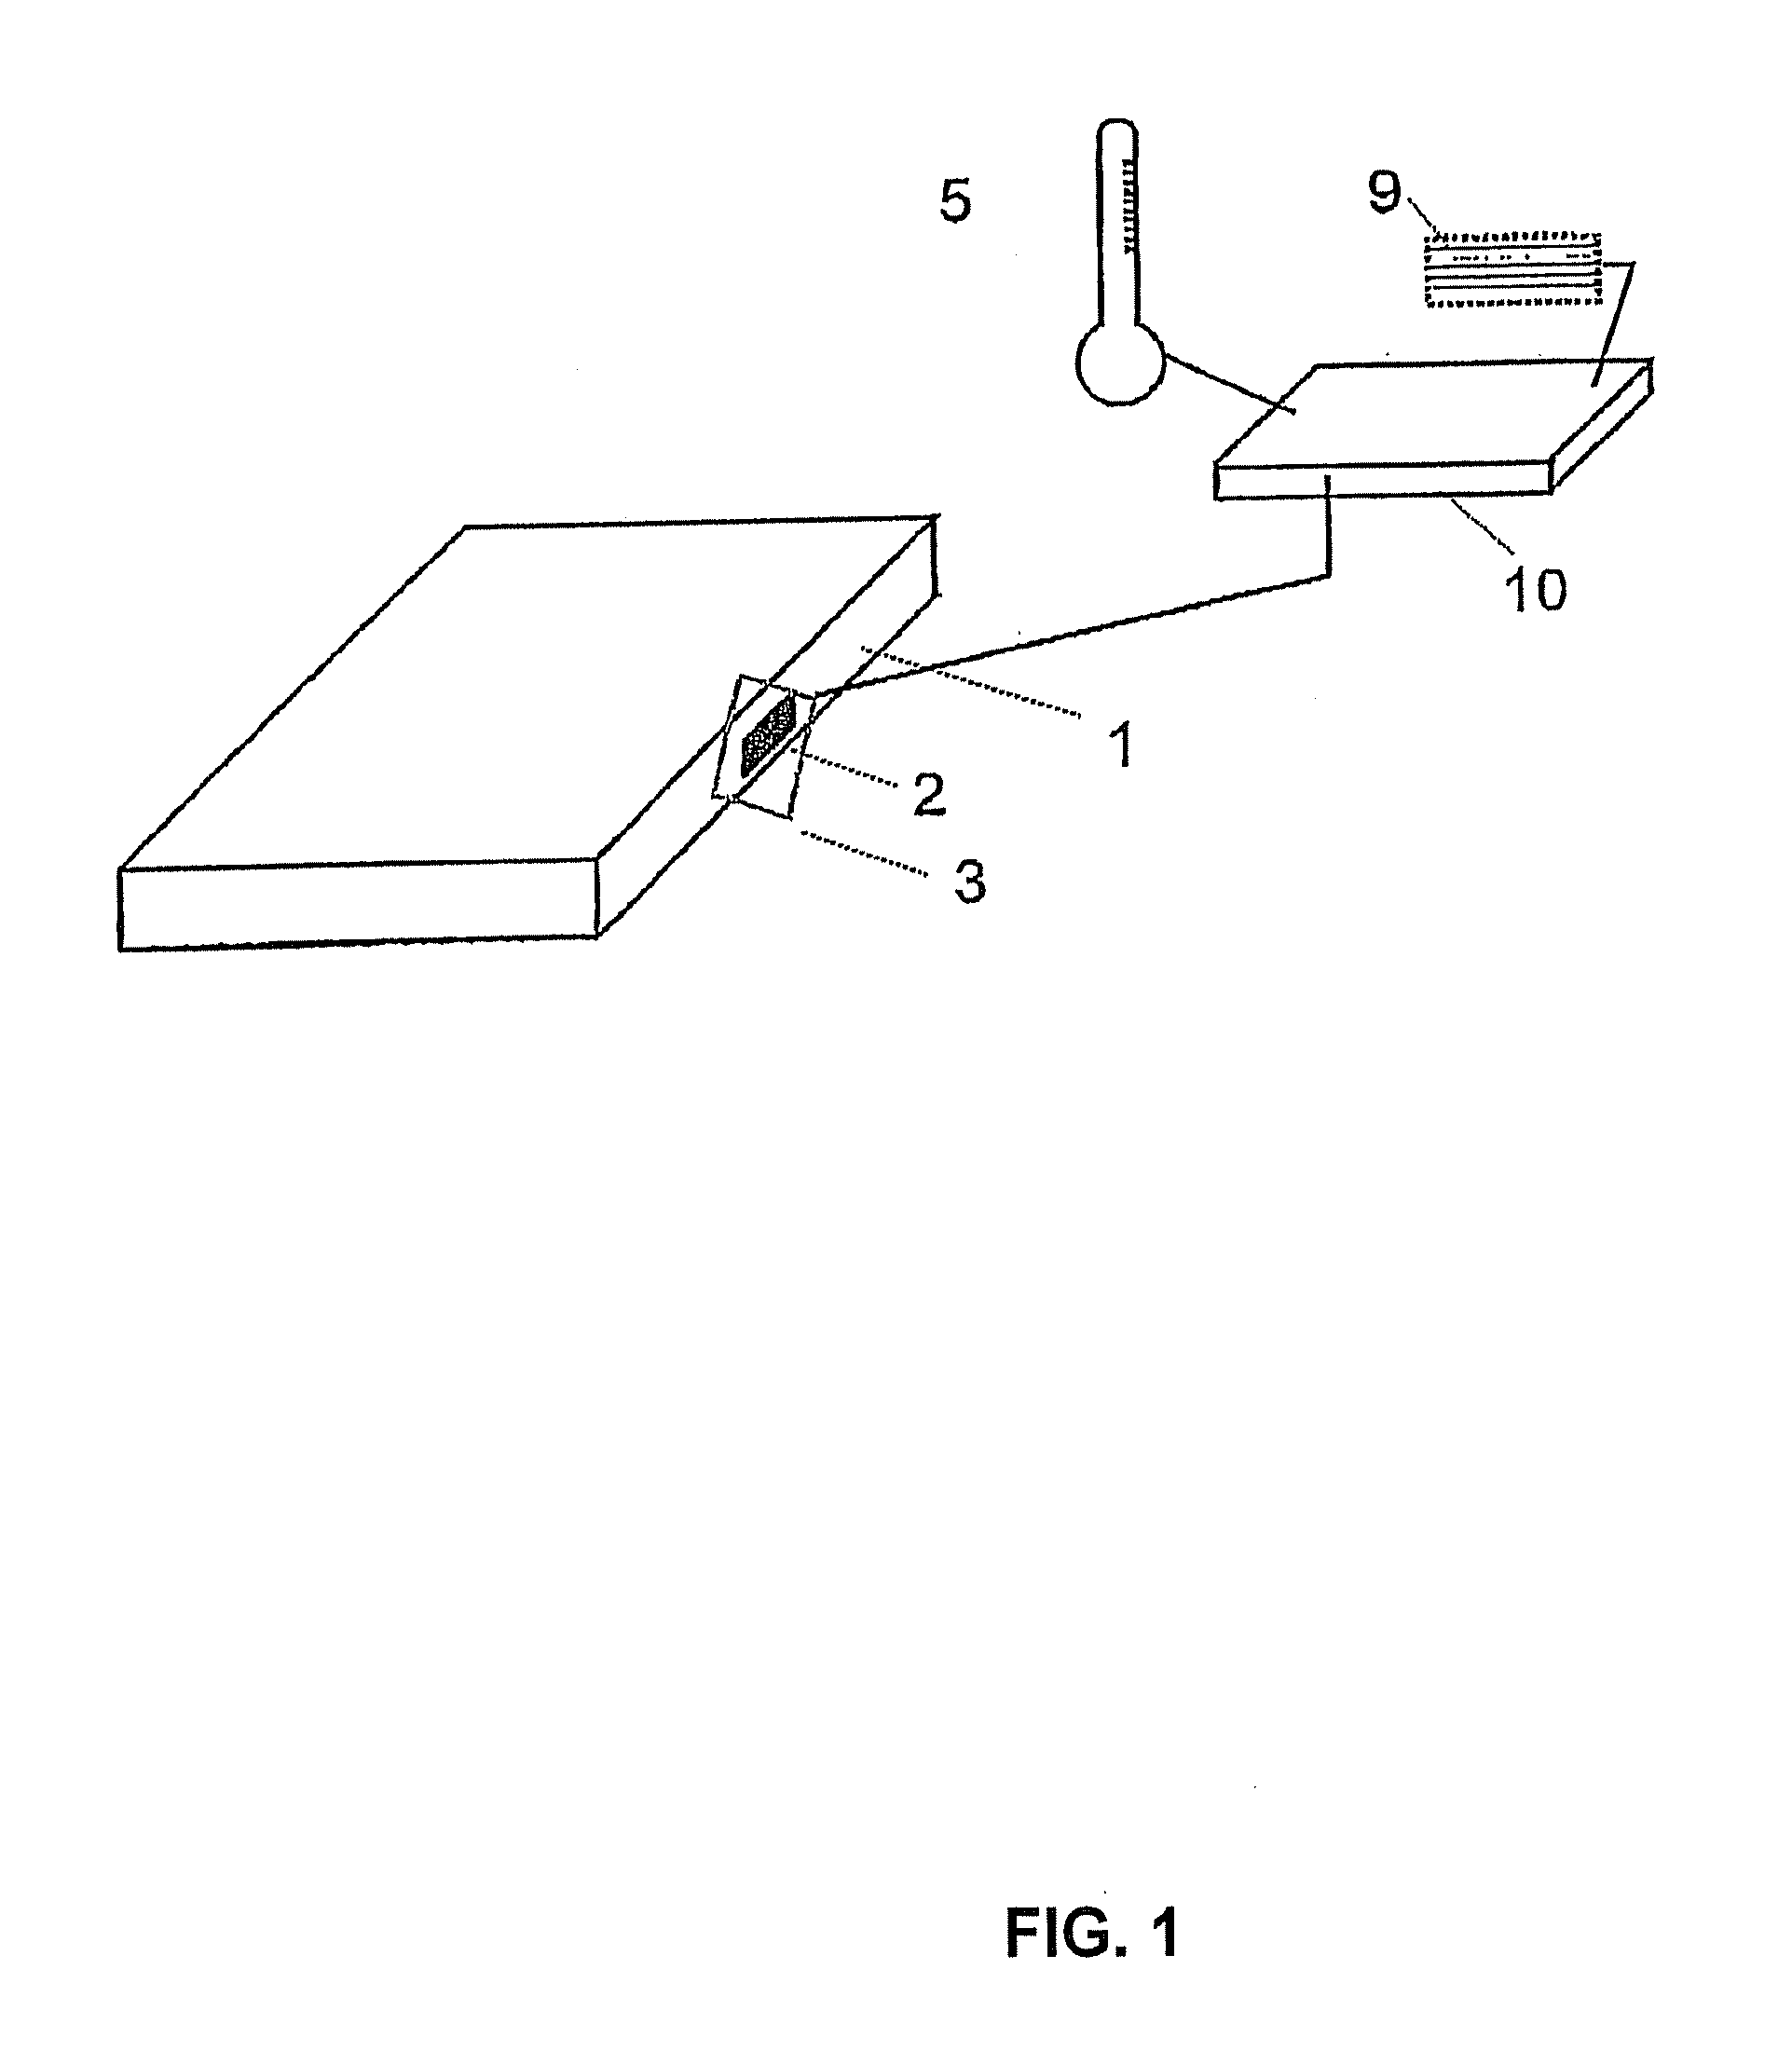 System and Method For Monitoring Manufactured Pre-Prepared Meals